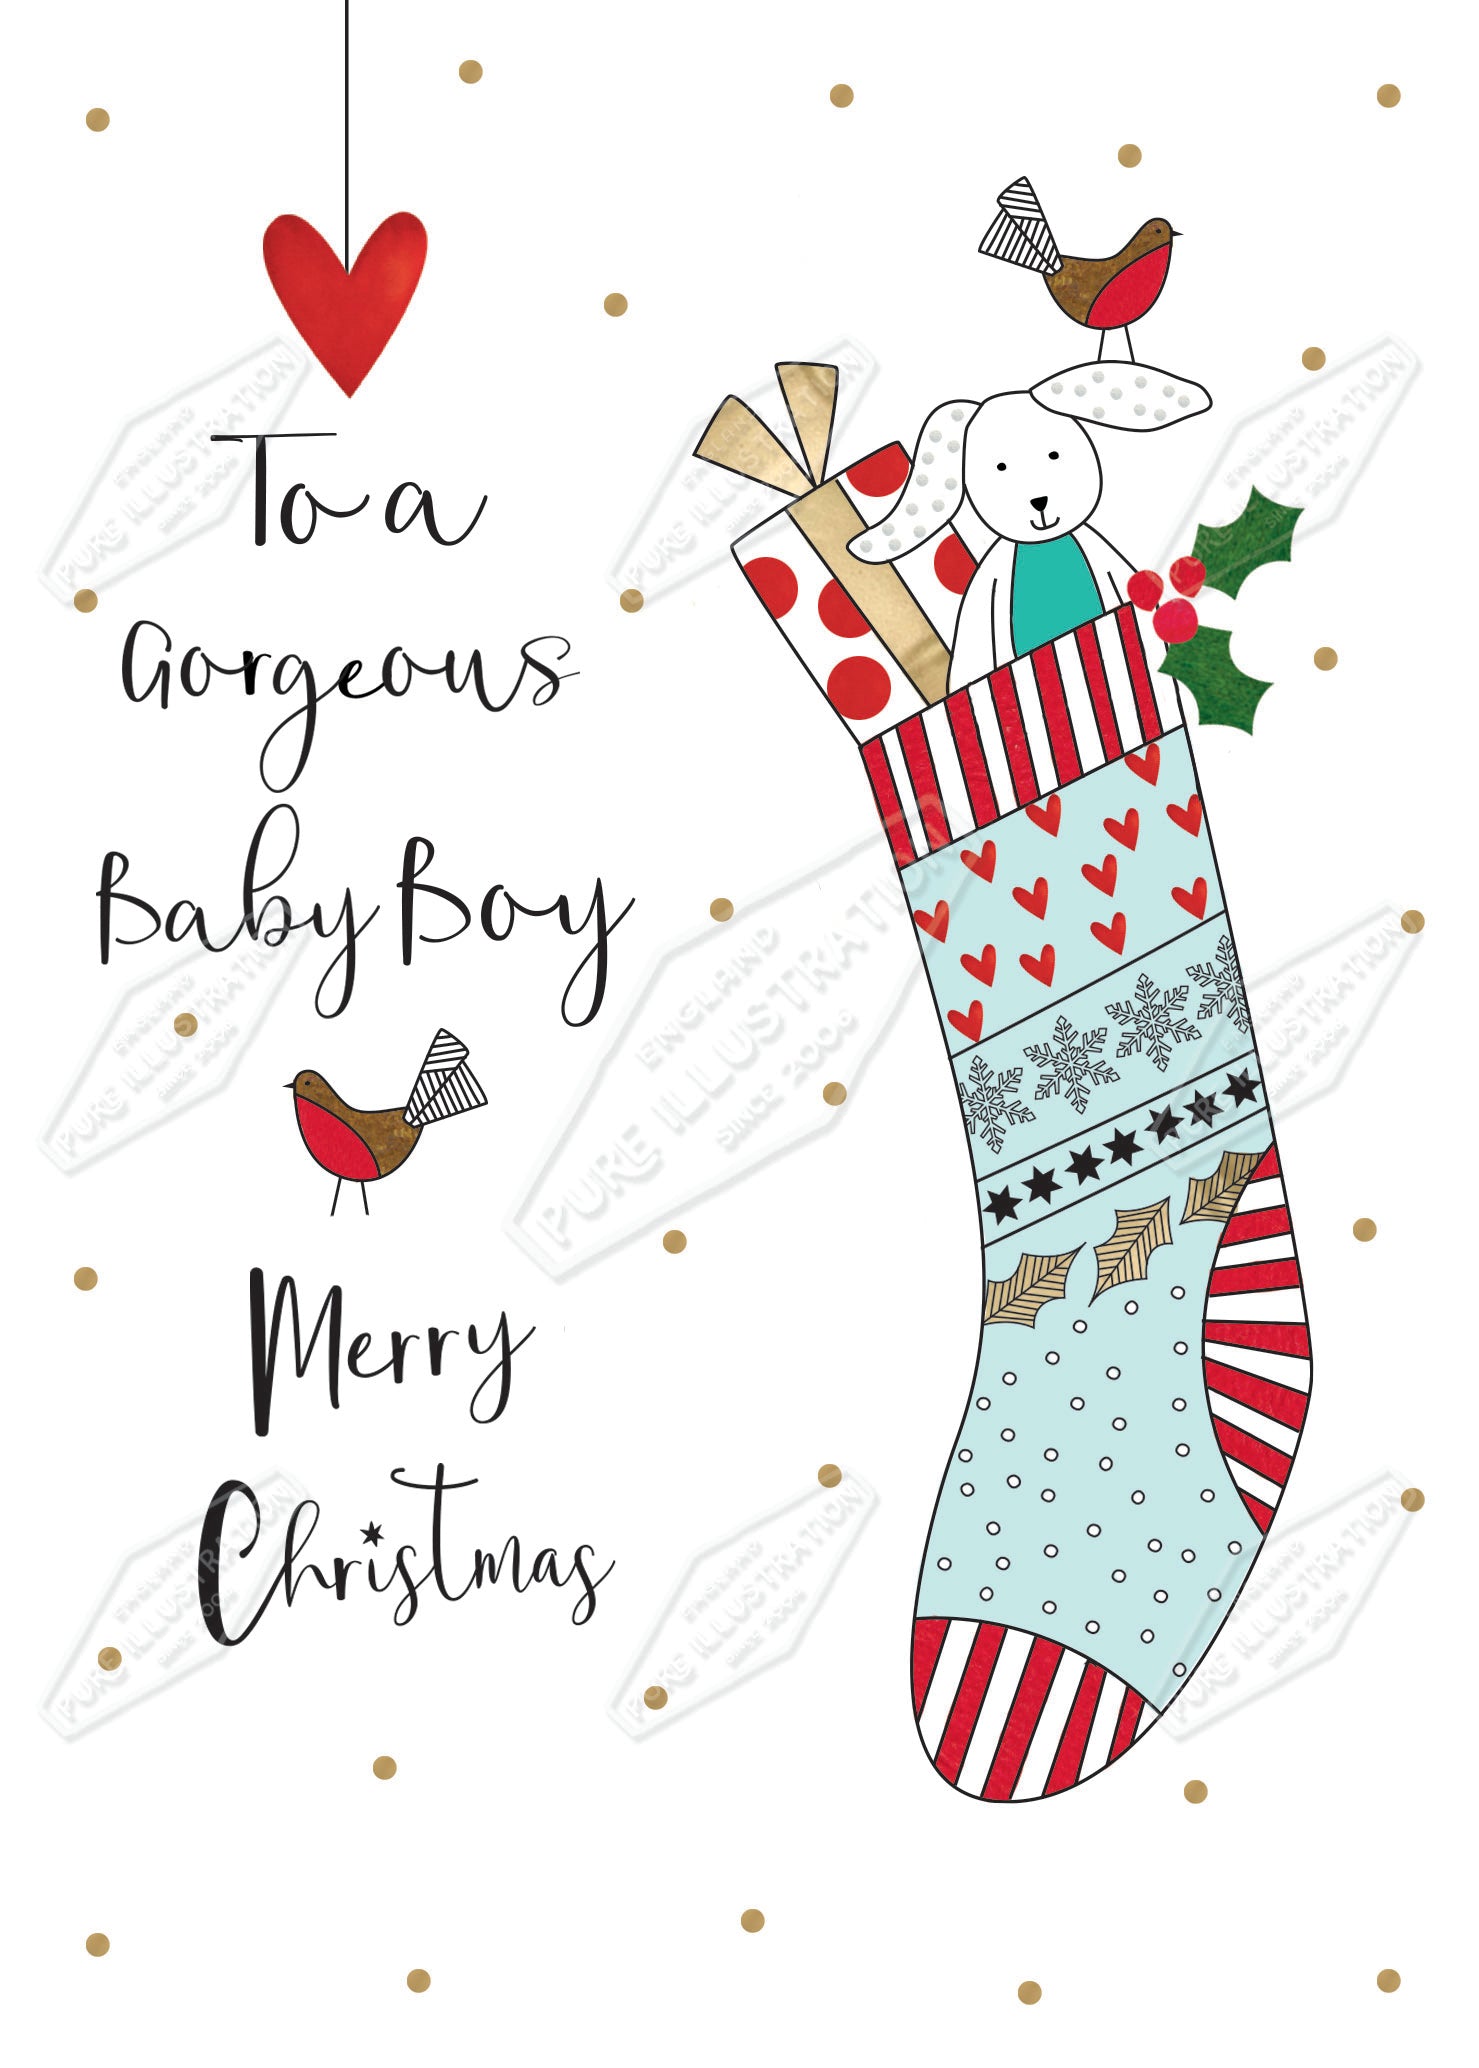 00035422IMC- Isla McDonald is represented by Pure Art Licensing Agency - Christmas Greeting Card Design